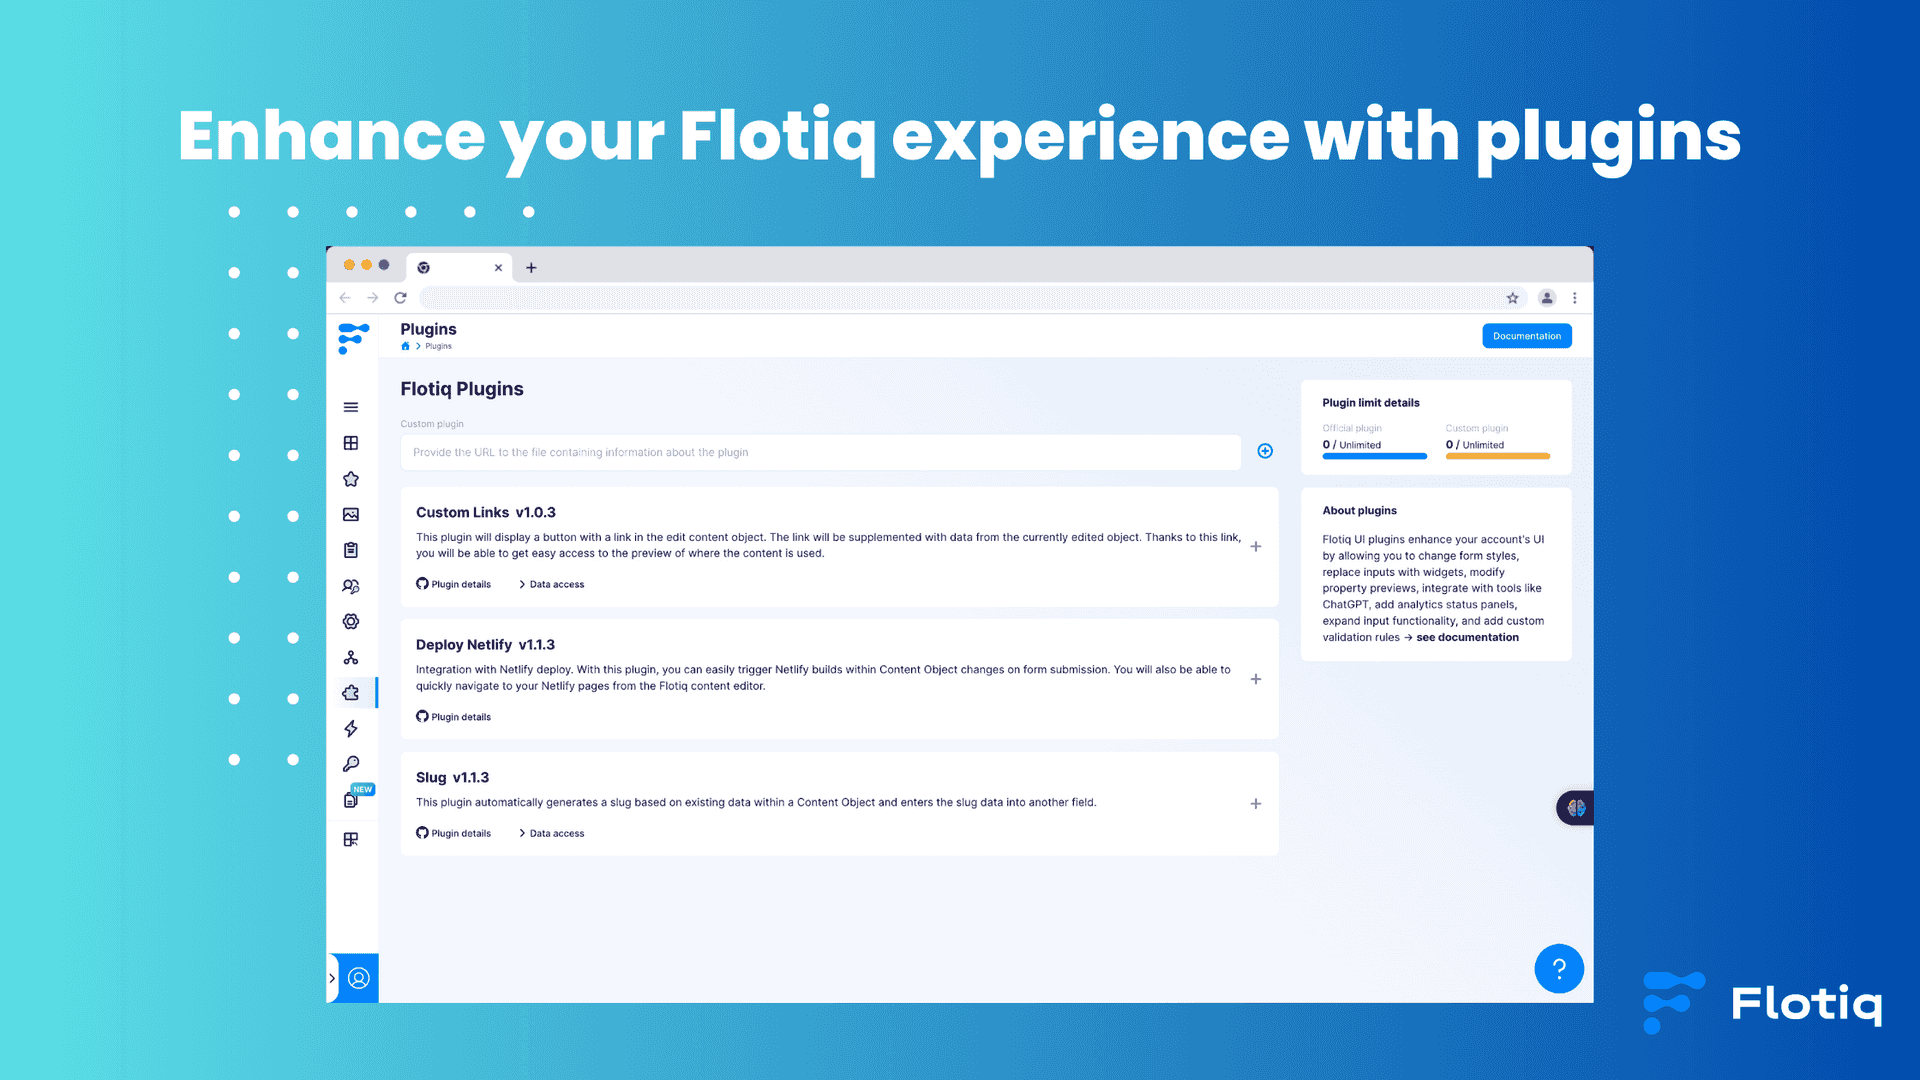 Enhance your Flotiq experience with plugins